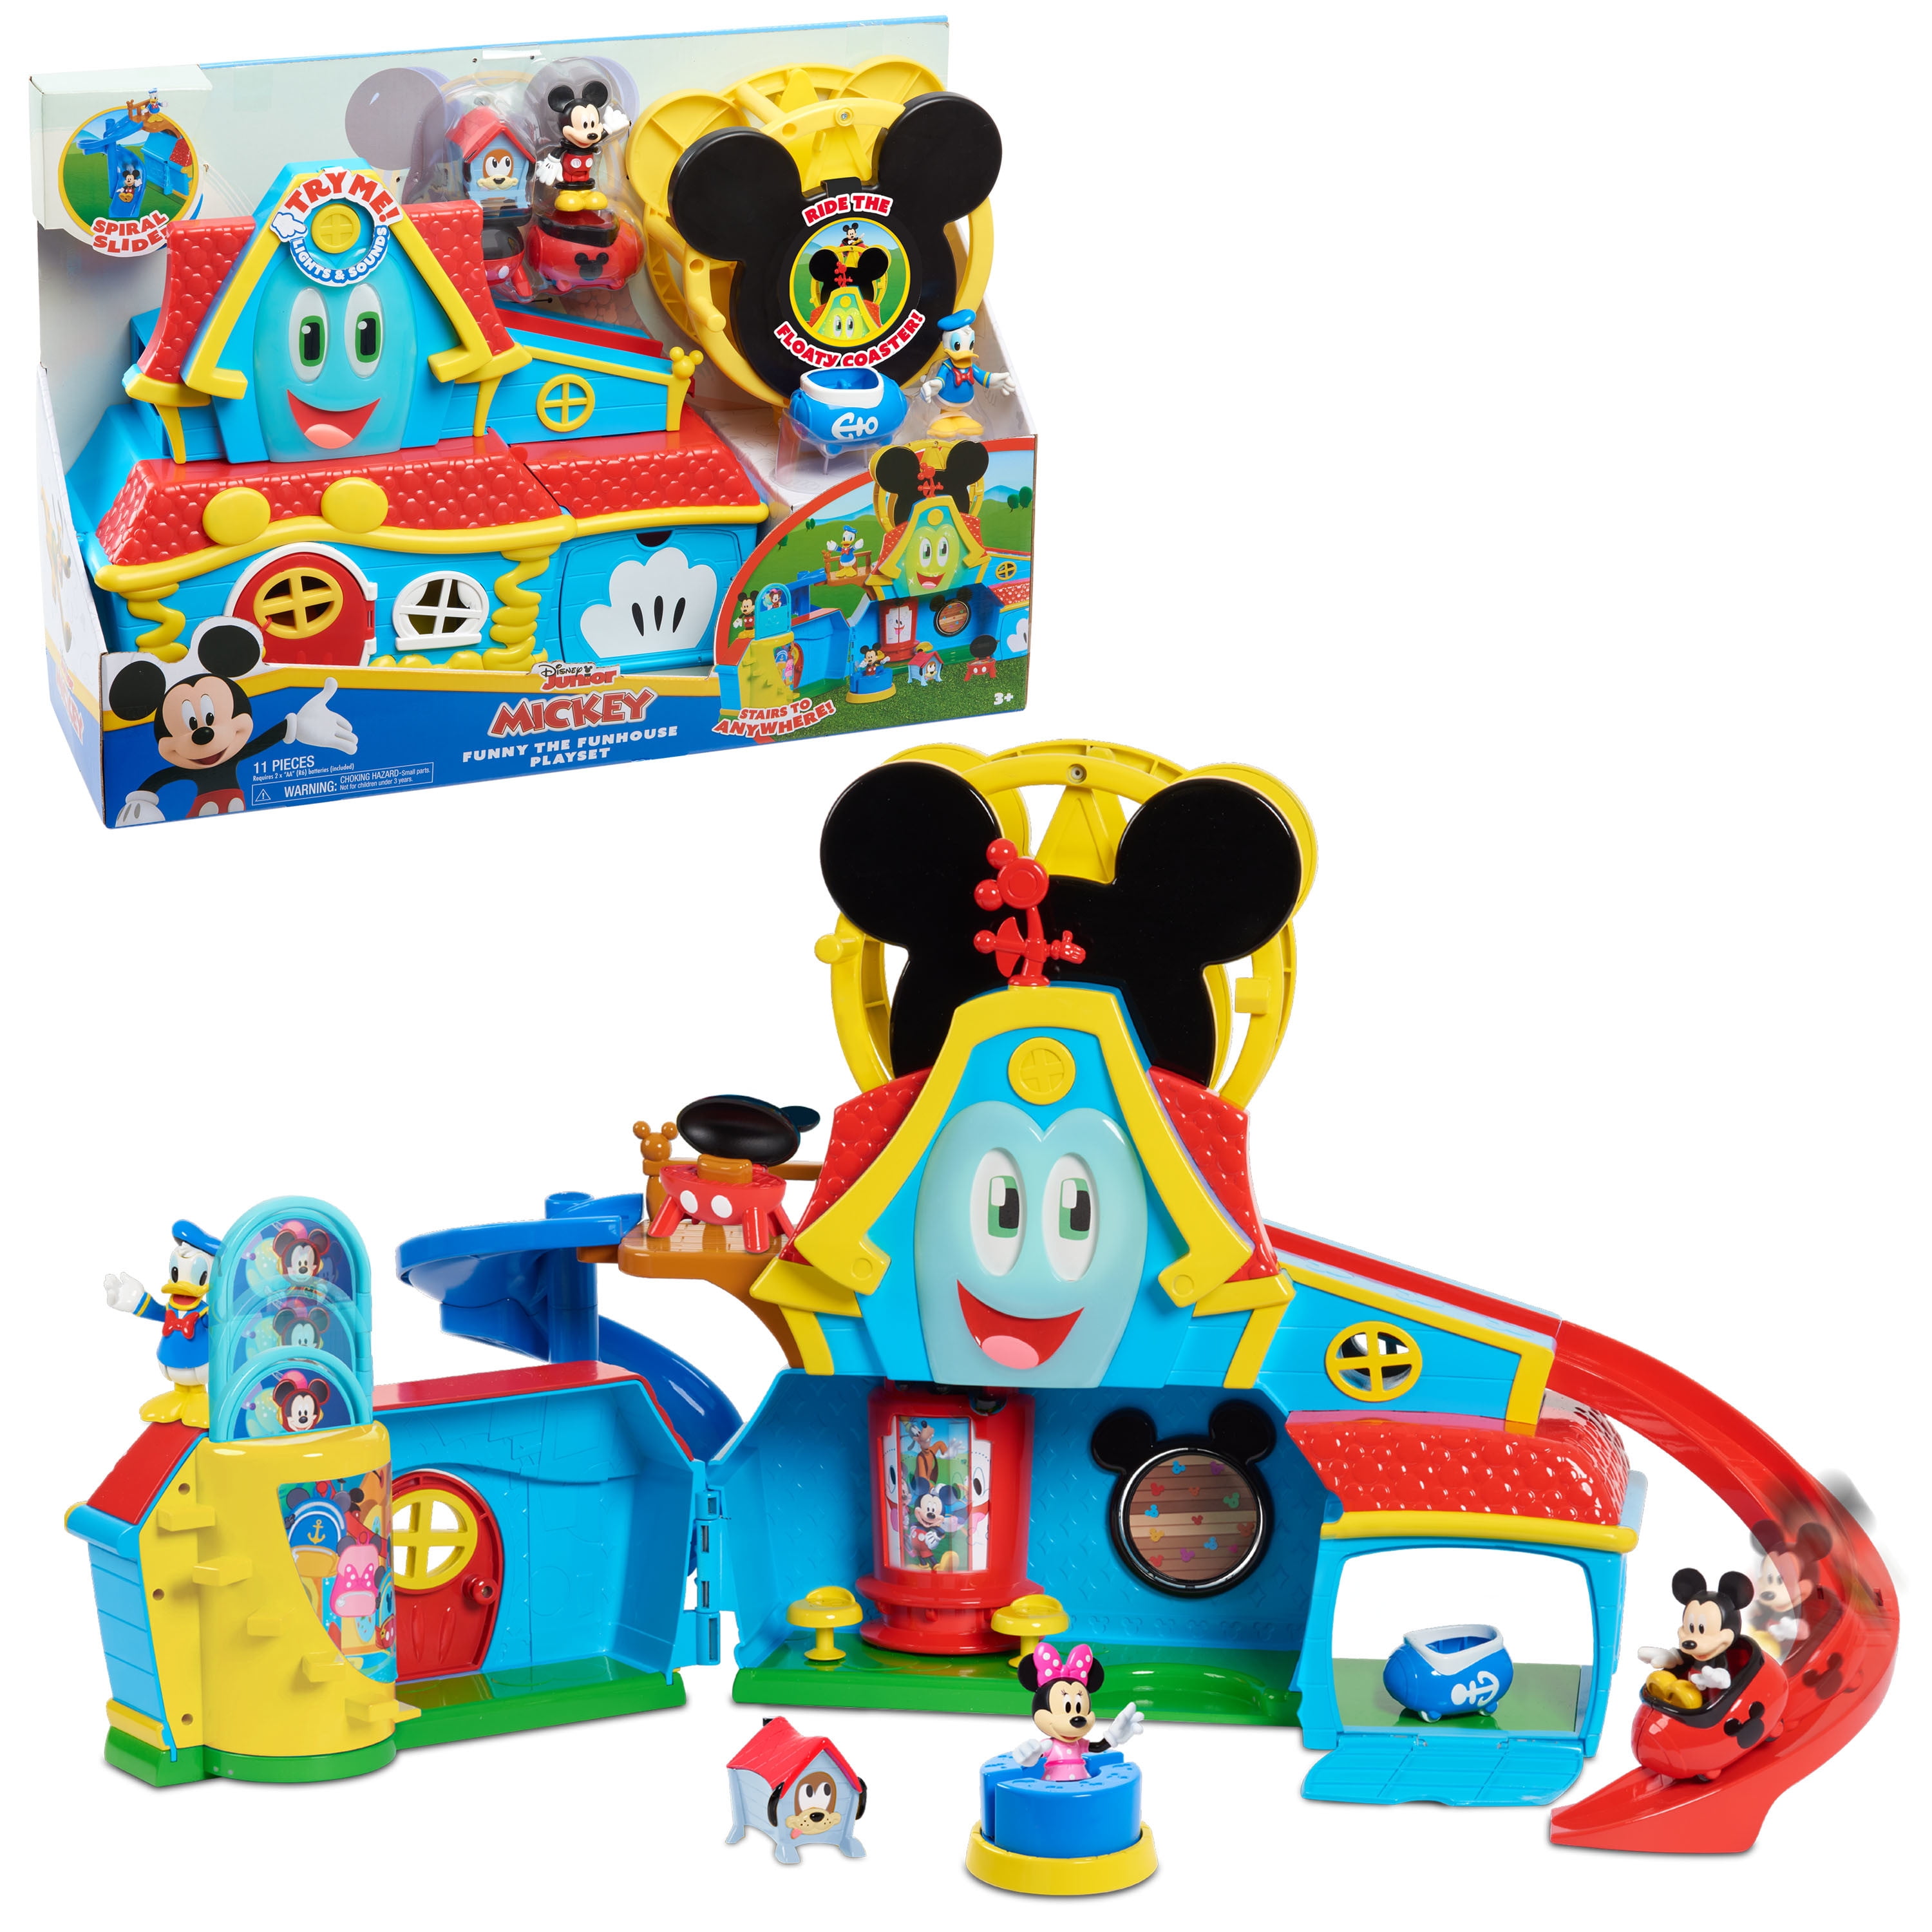 New Disney Junior Mickey Mouse Clubhouse Deluxe Playset Lights Sounds ...